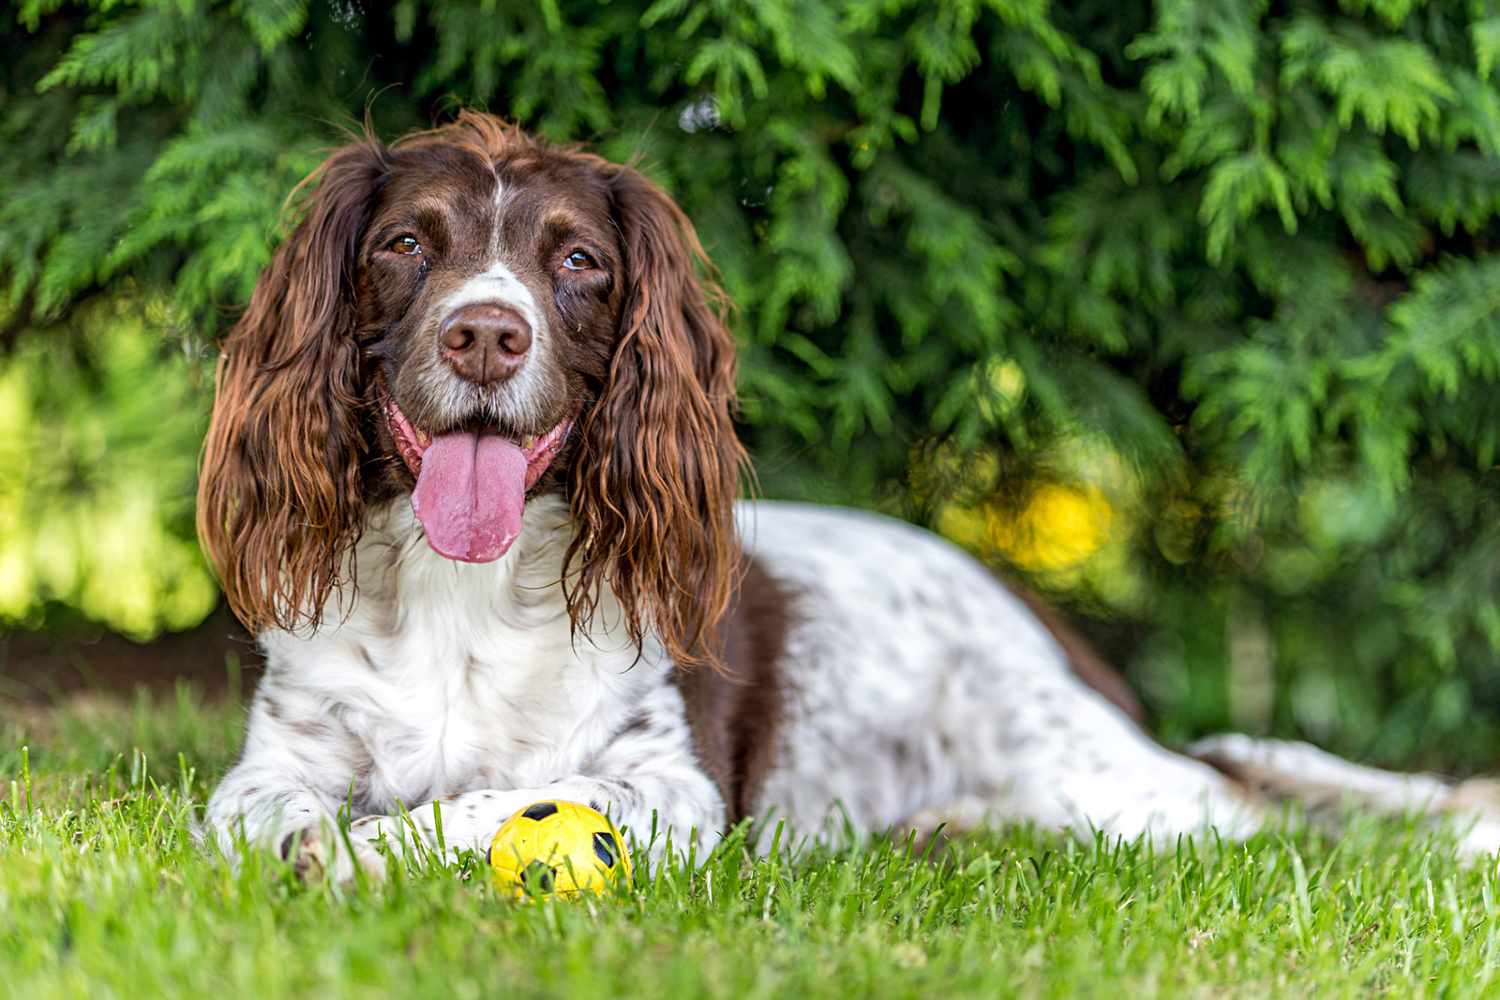 english springer spaniel lying next to a yellow ball with her tongue out